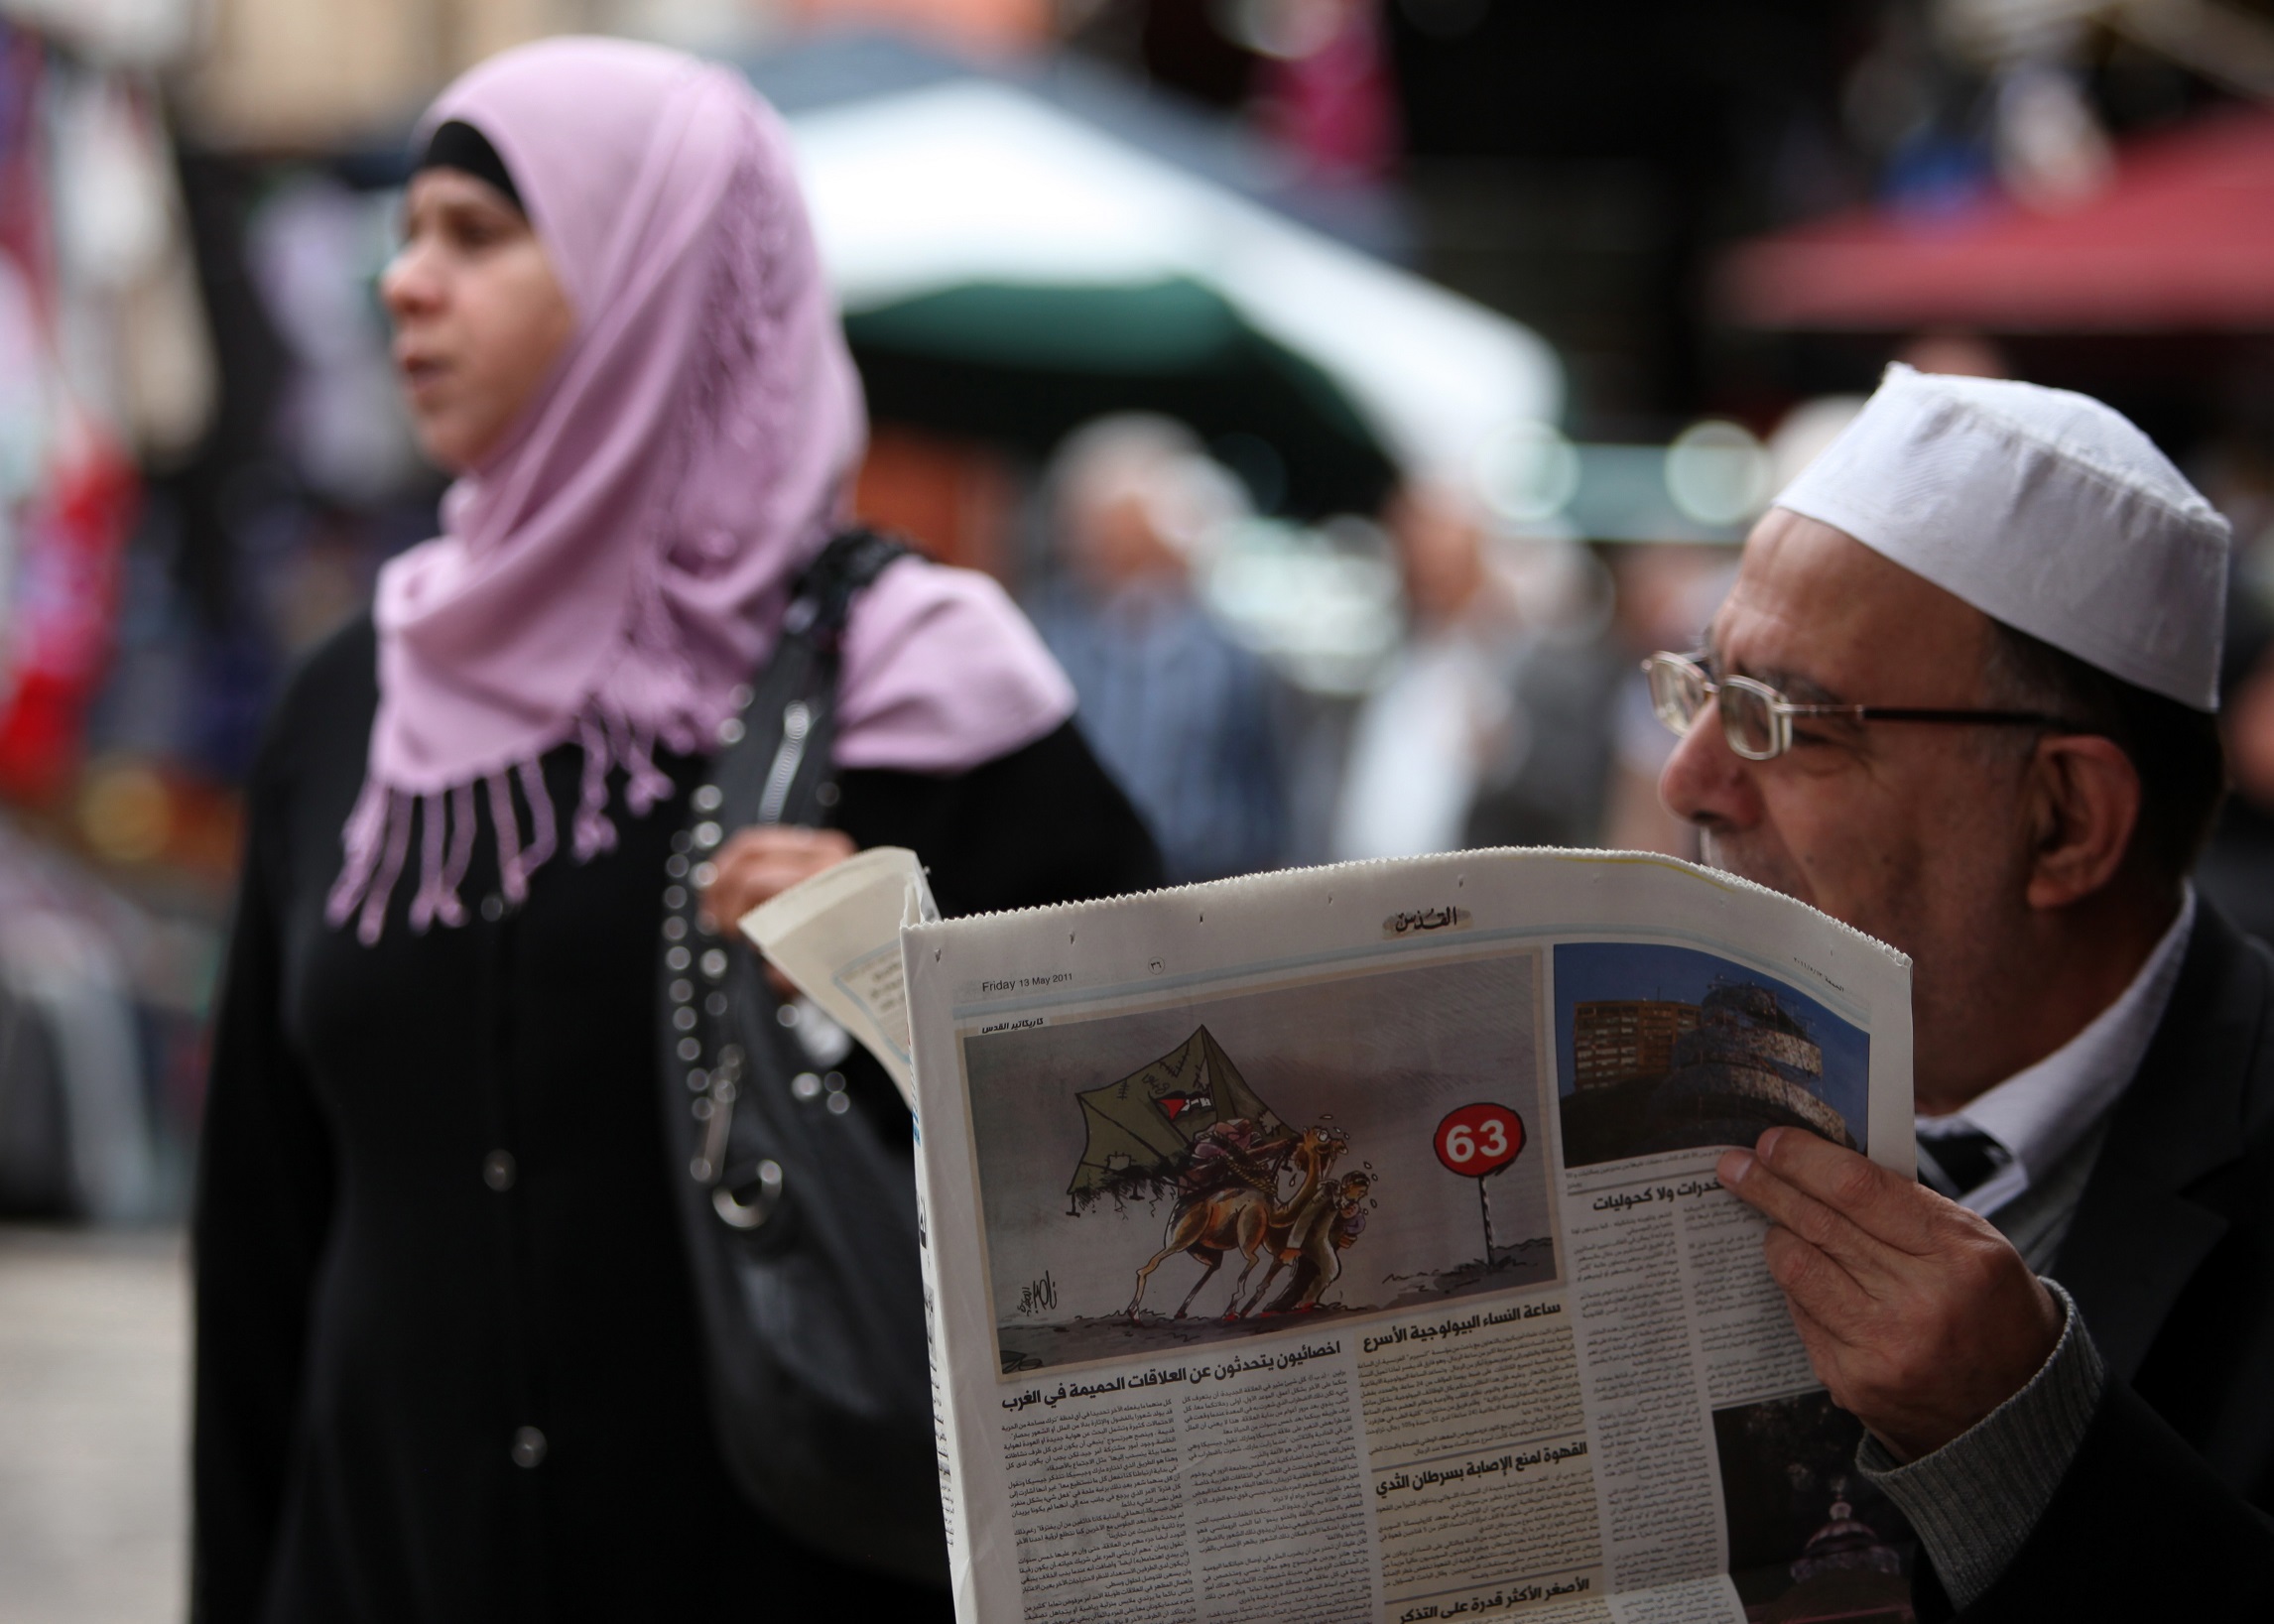 A picture of a man in glasses reading the paper while a woman in a pink hijab walks behind him, not looking at the camera. 